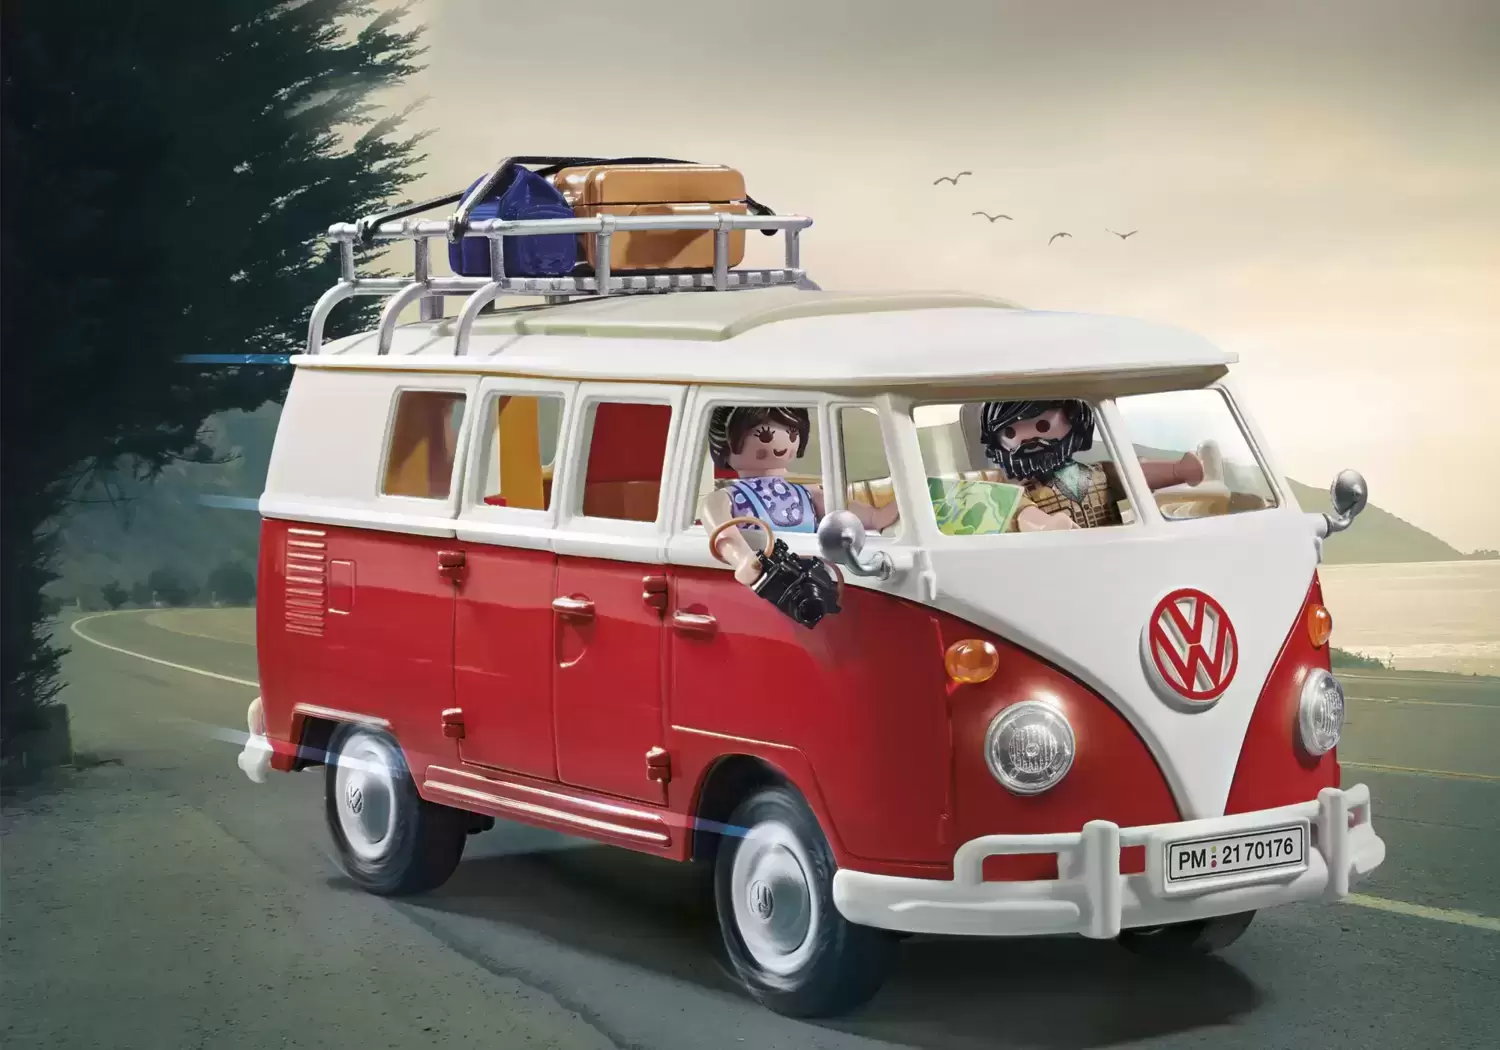 Playmobil on Hollidays - Volkswagen T1 Camping Bus